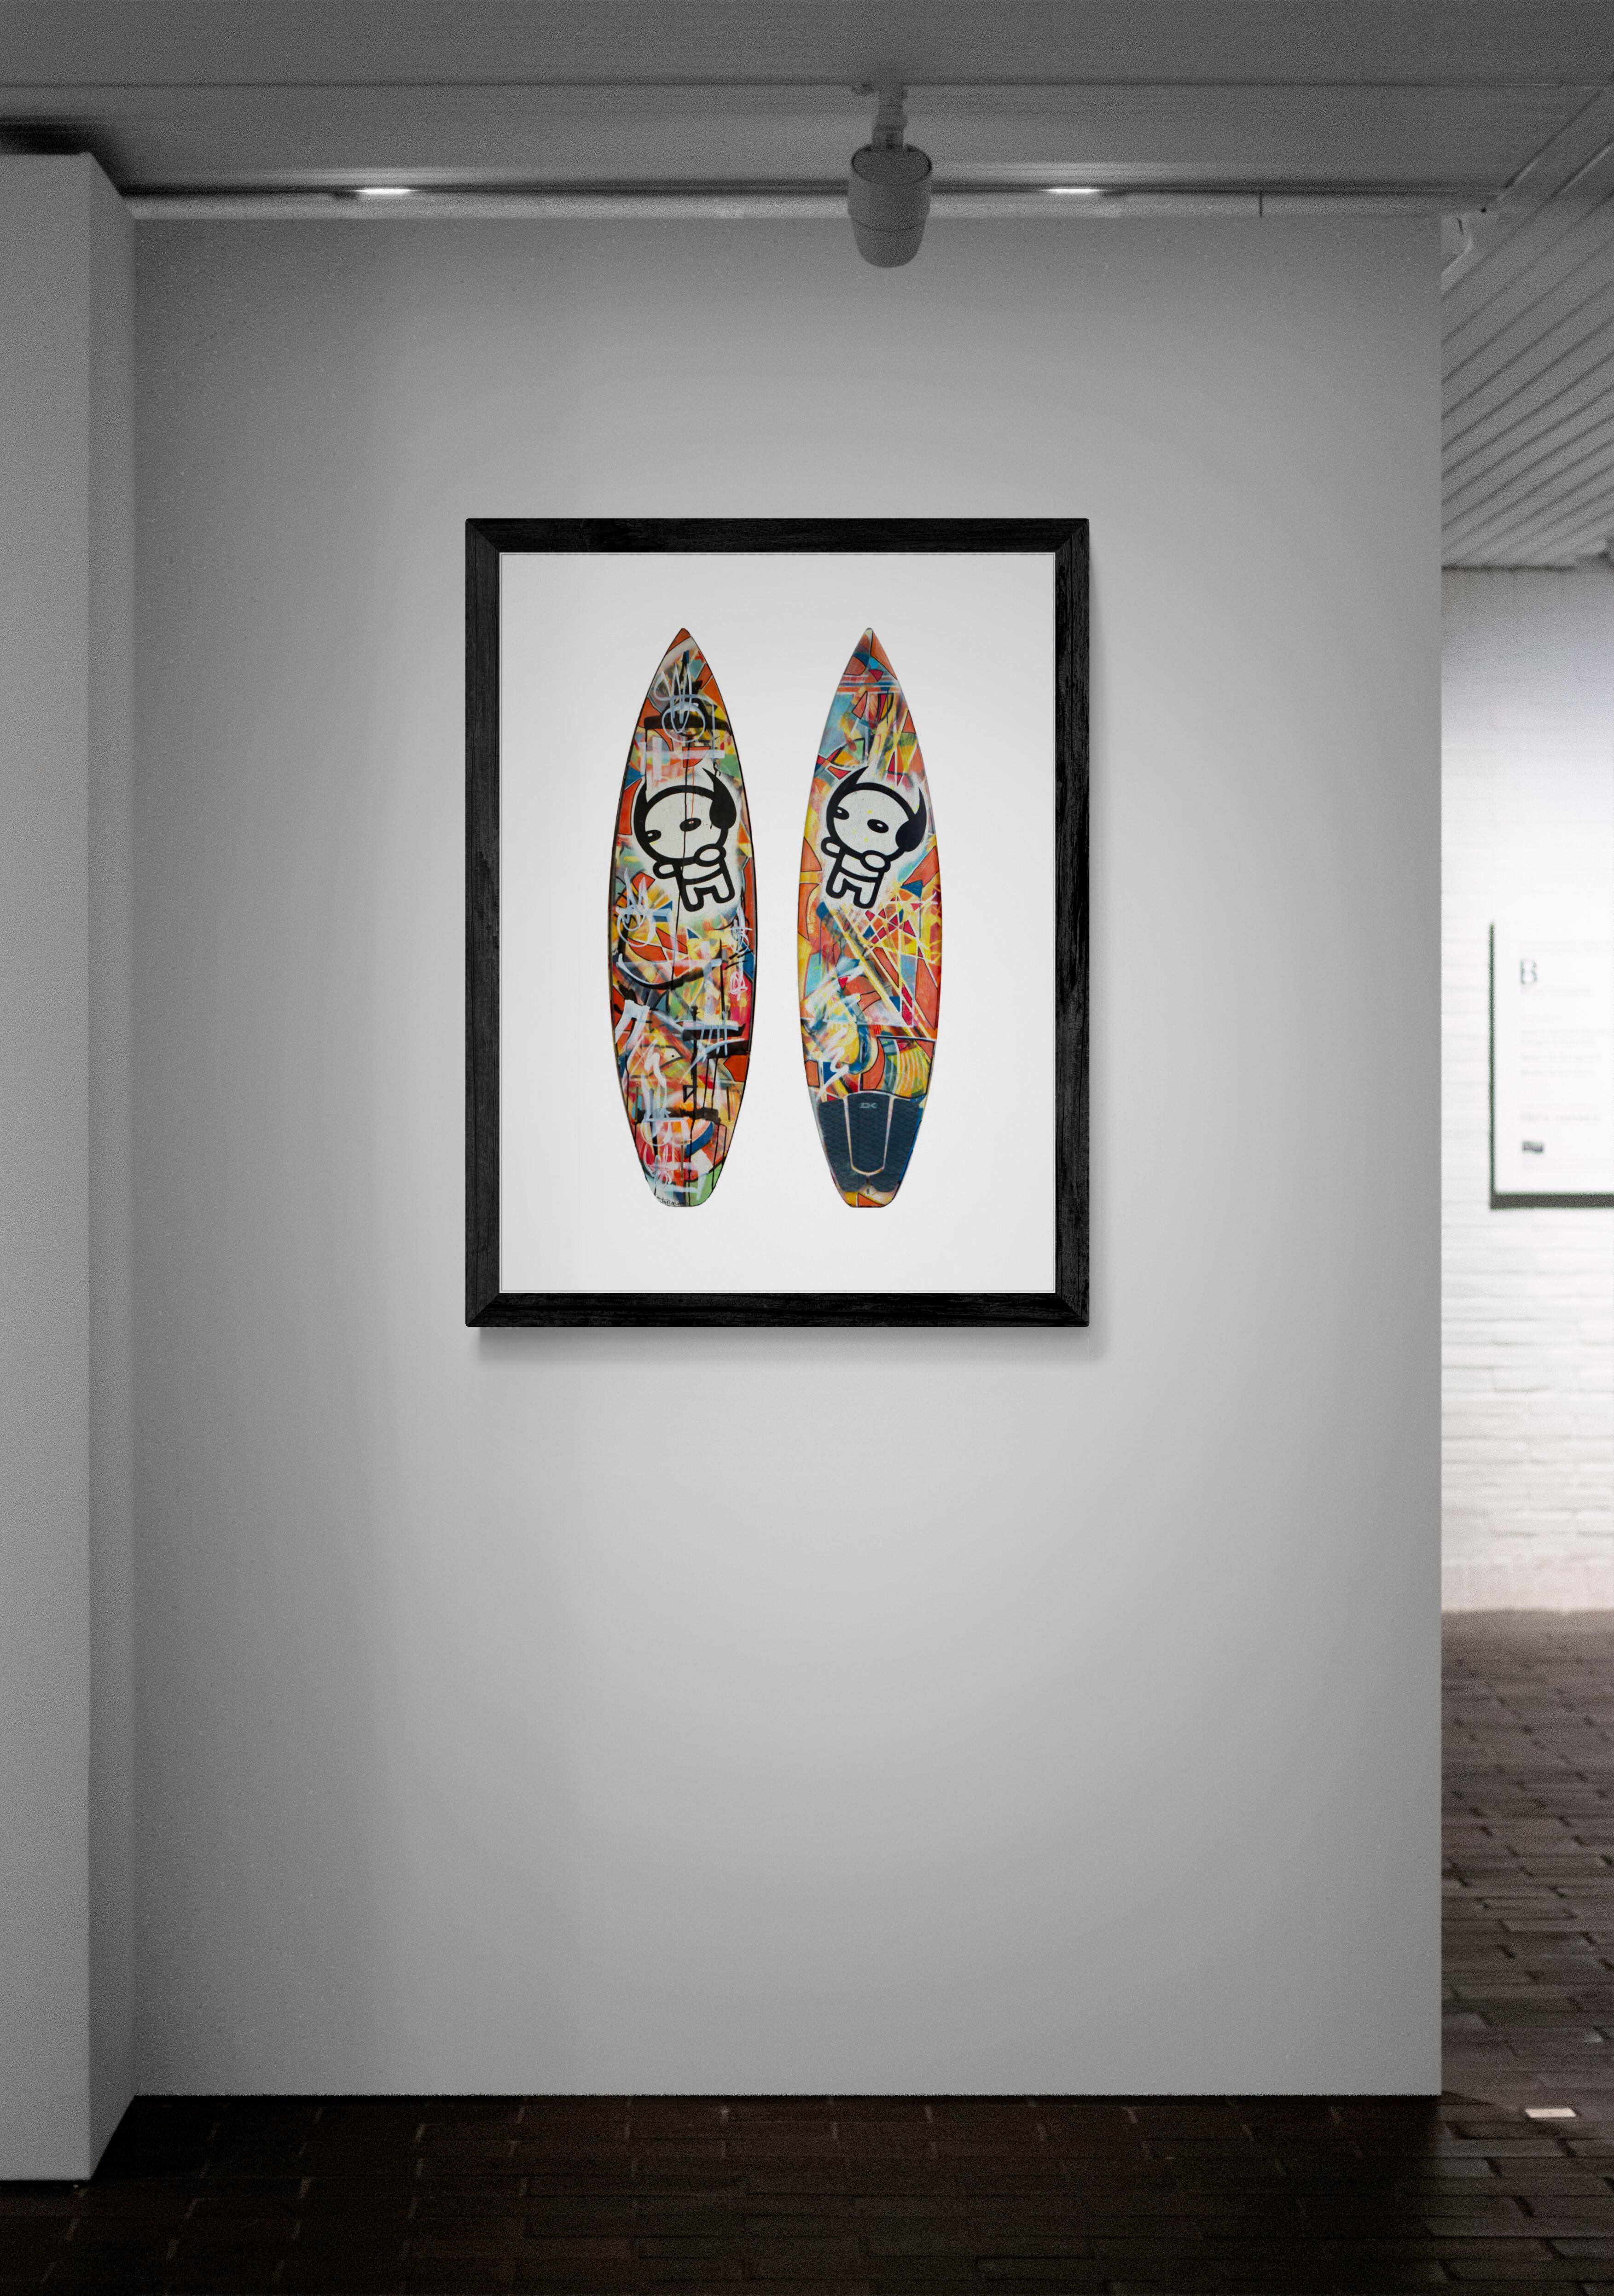 Artist: Michael Torquato deNicola

Title: Rock Star Surf Board Print

Edition Details: Archival pigment print on 100% Agave/Cotton sustainable fine art paper, signed and numbered in the margins by the artist, and released in the following exclusive